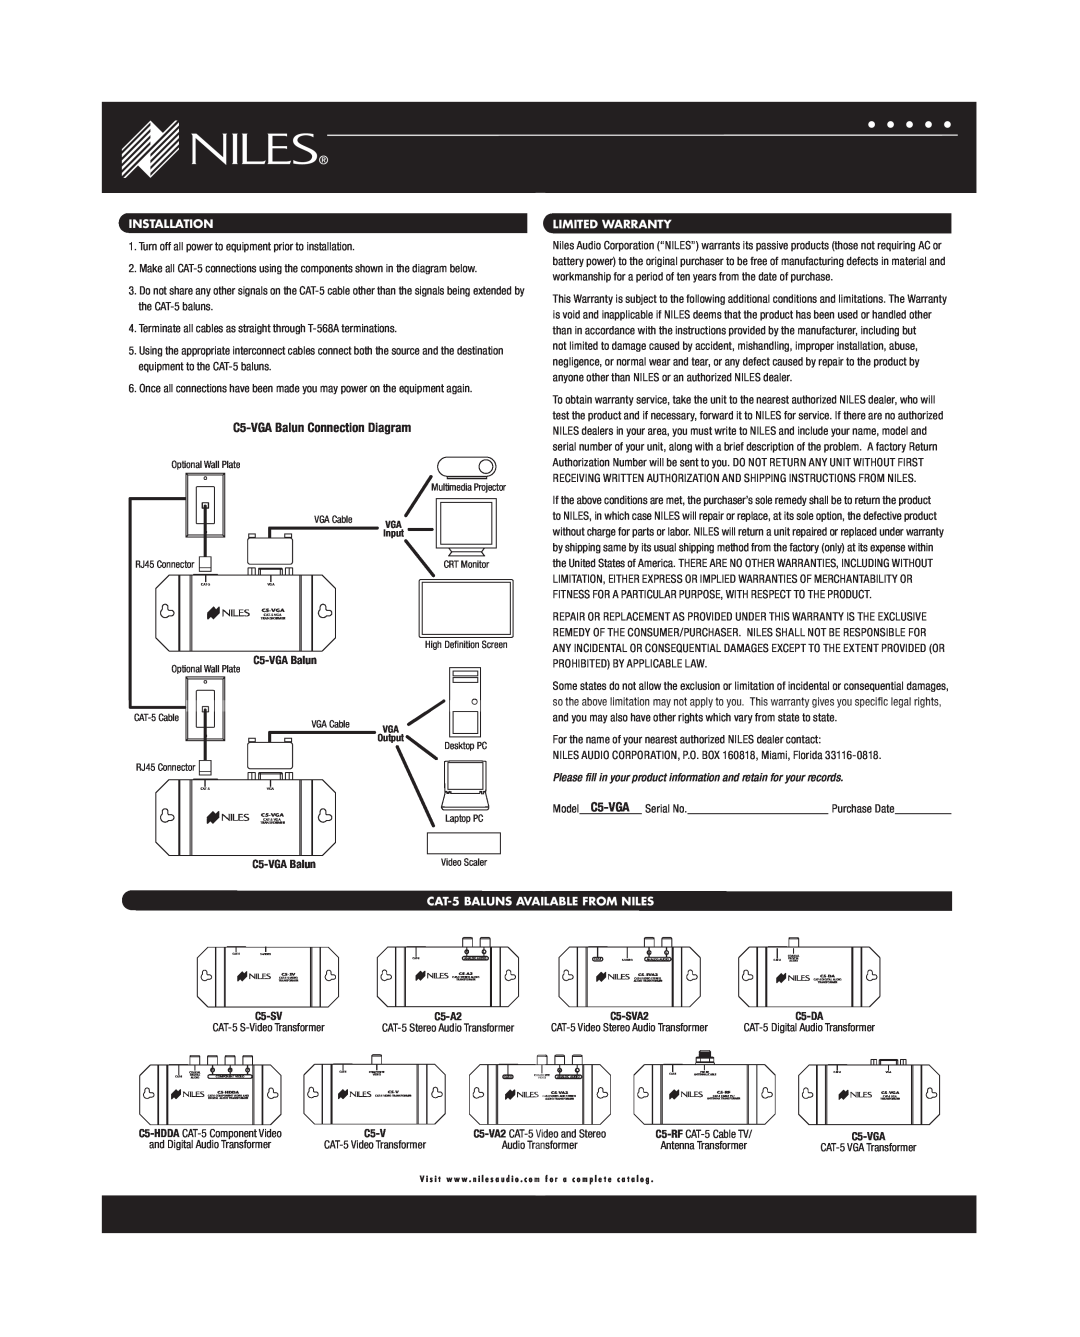 Niles Audio C5-VGA warranty Installation, Turn off all power to equipment prior to installation, Limited Warranty 